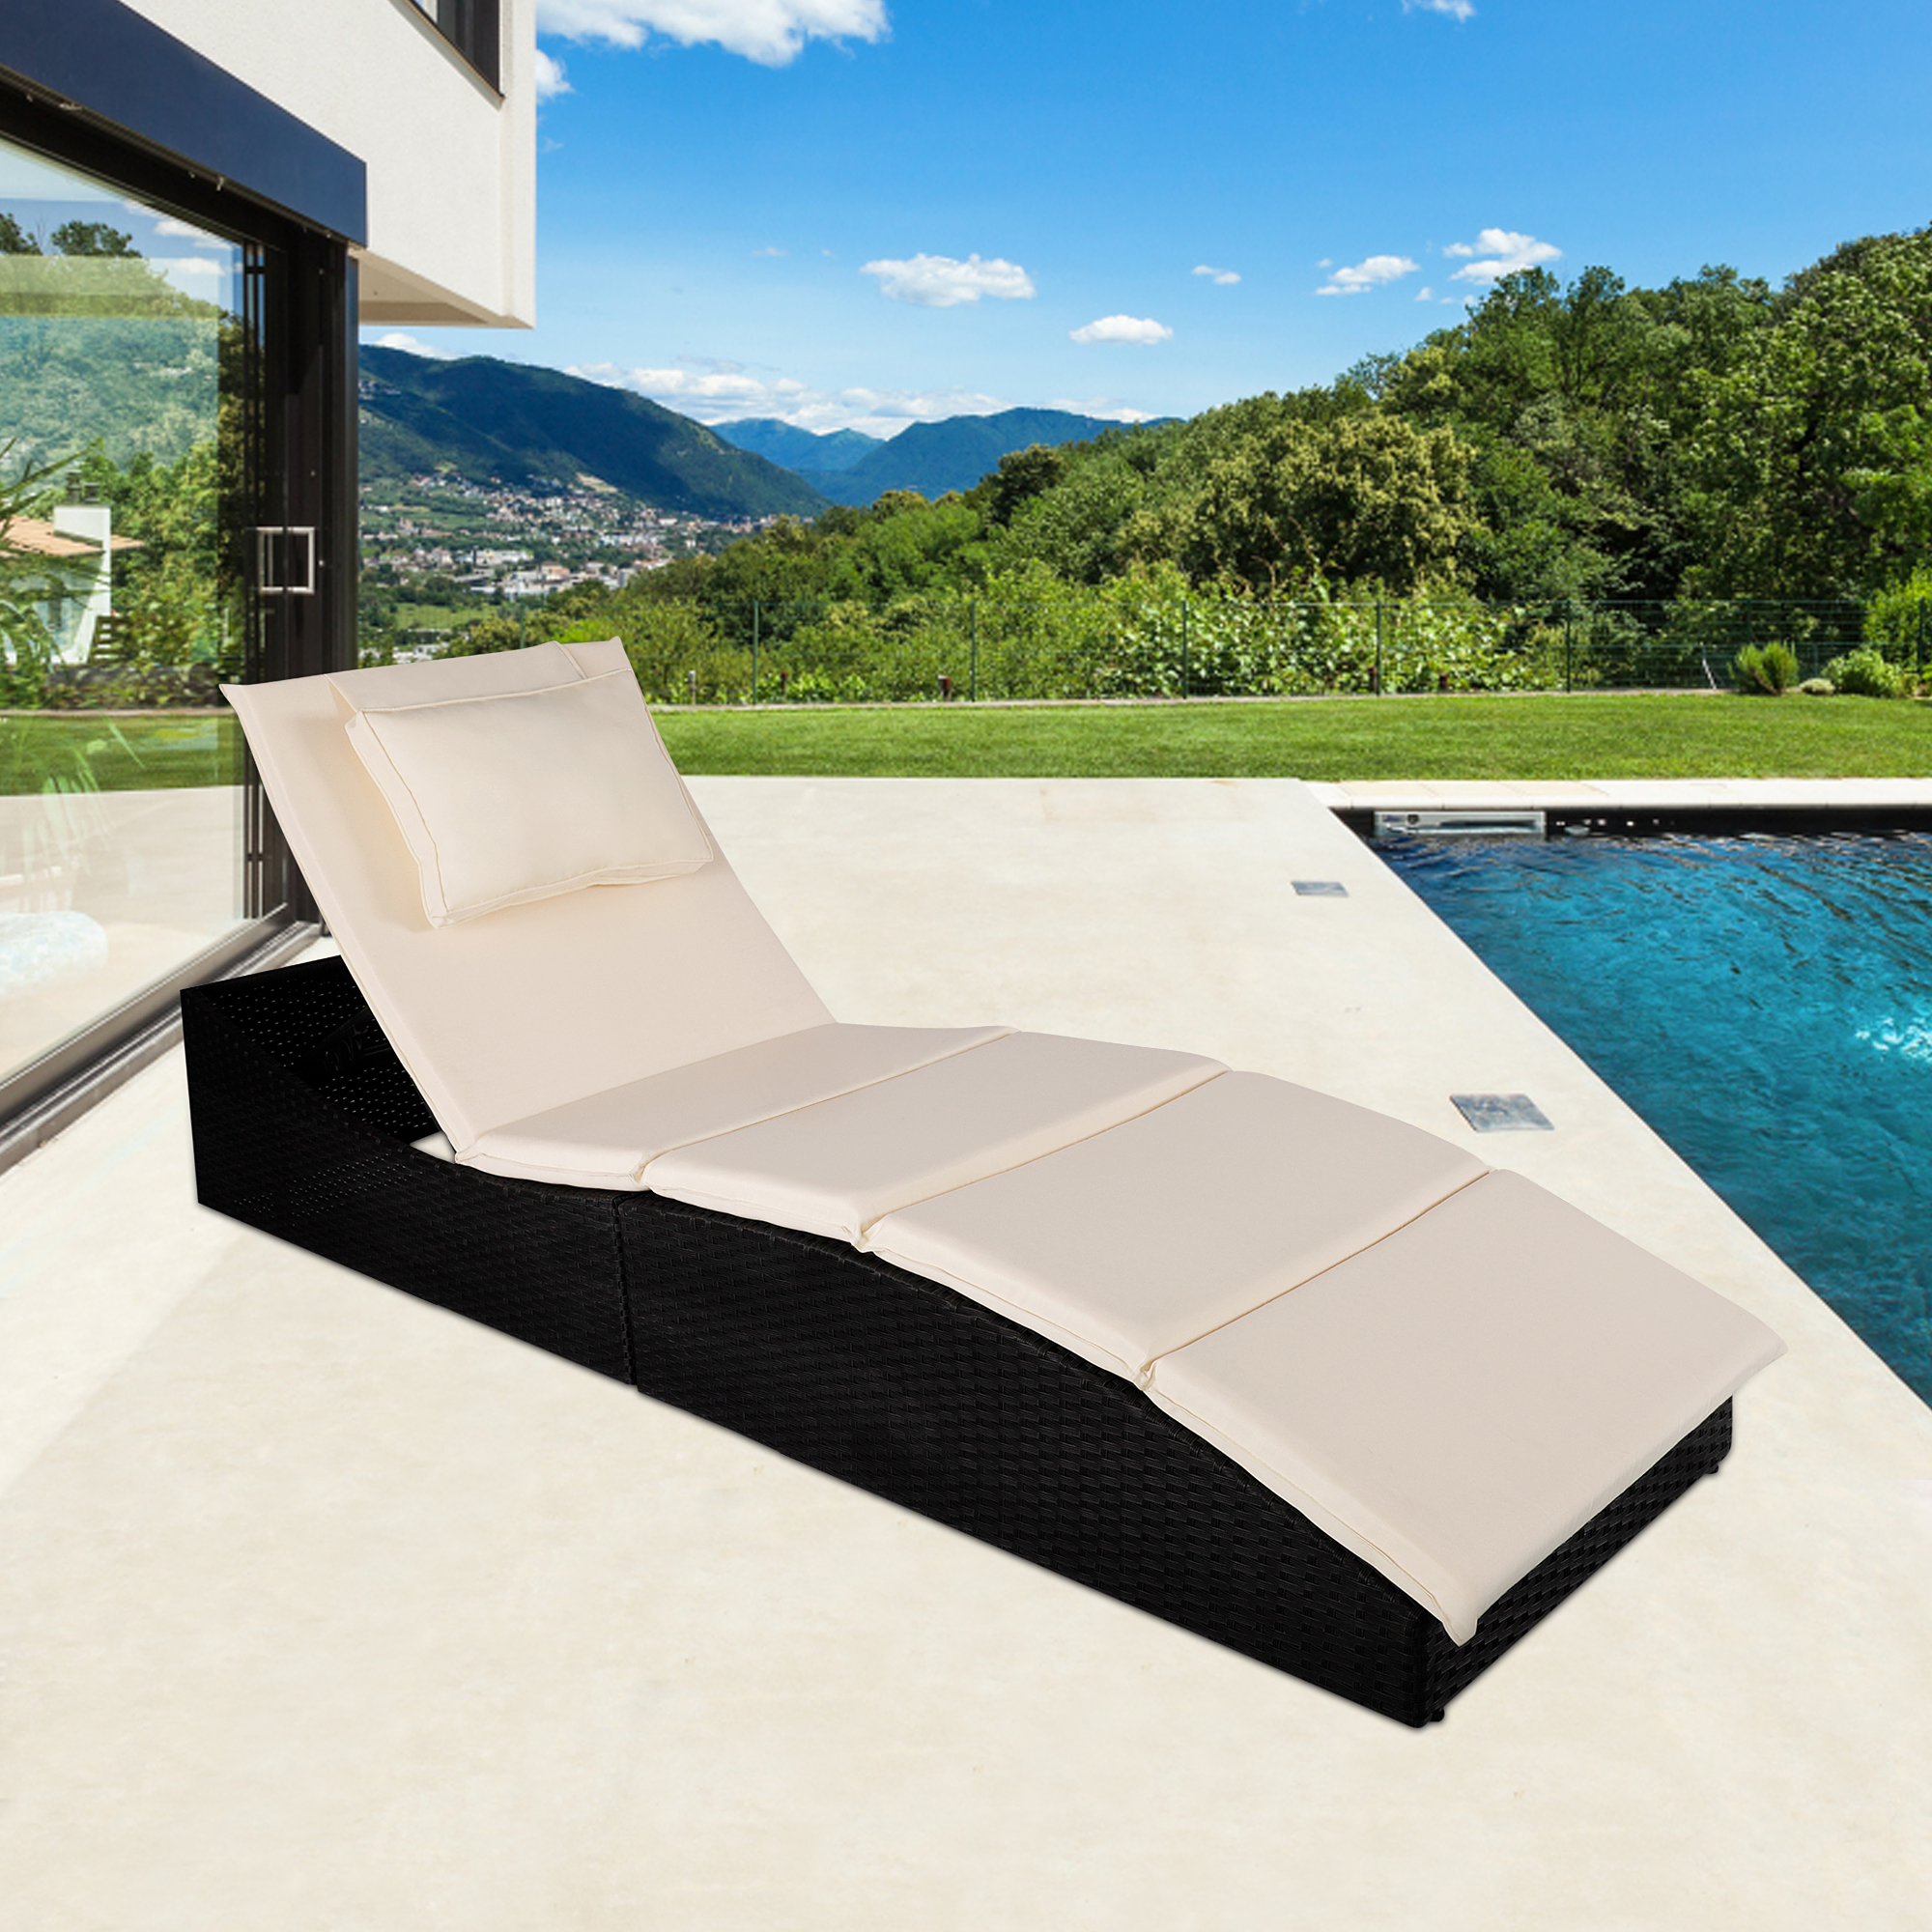 Chaise Lounge Chair Outdoor, enyopro Wicker Patio Chaise Lounger with Cushion, All-Weather Adjustable Sun Chaise Lounge Furniture, Reclining Backrest Chaise Lounge for Yard Pool Porch Garden, K3721 - image 3 of 9